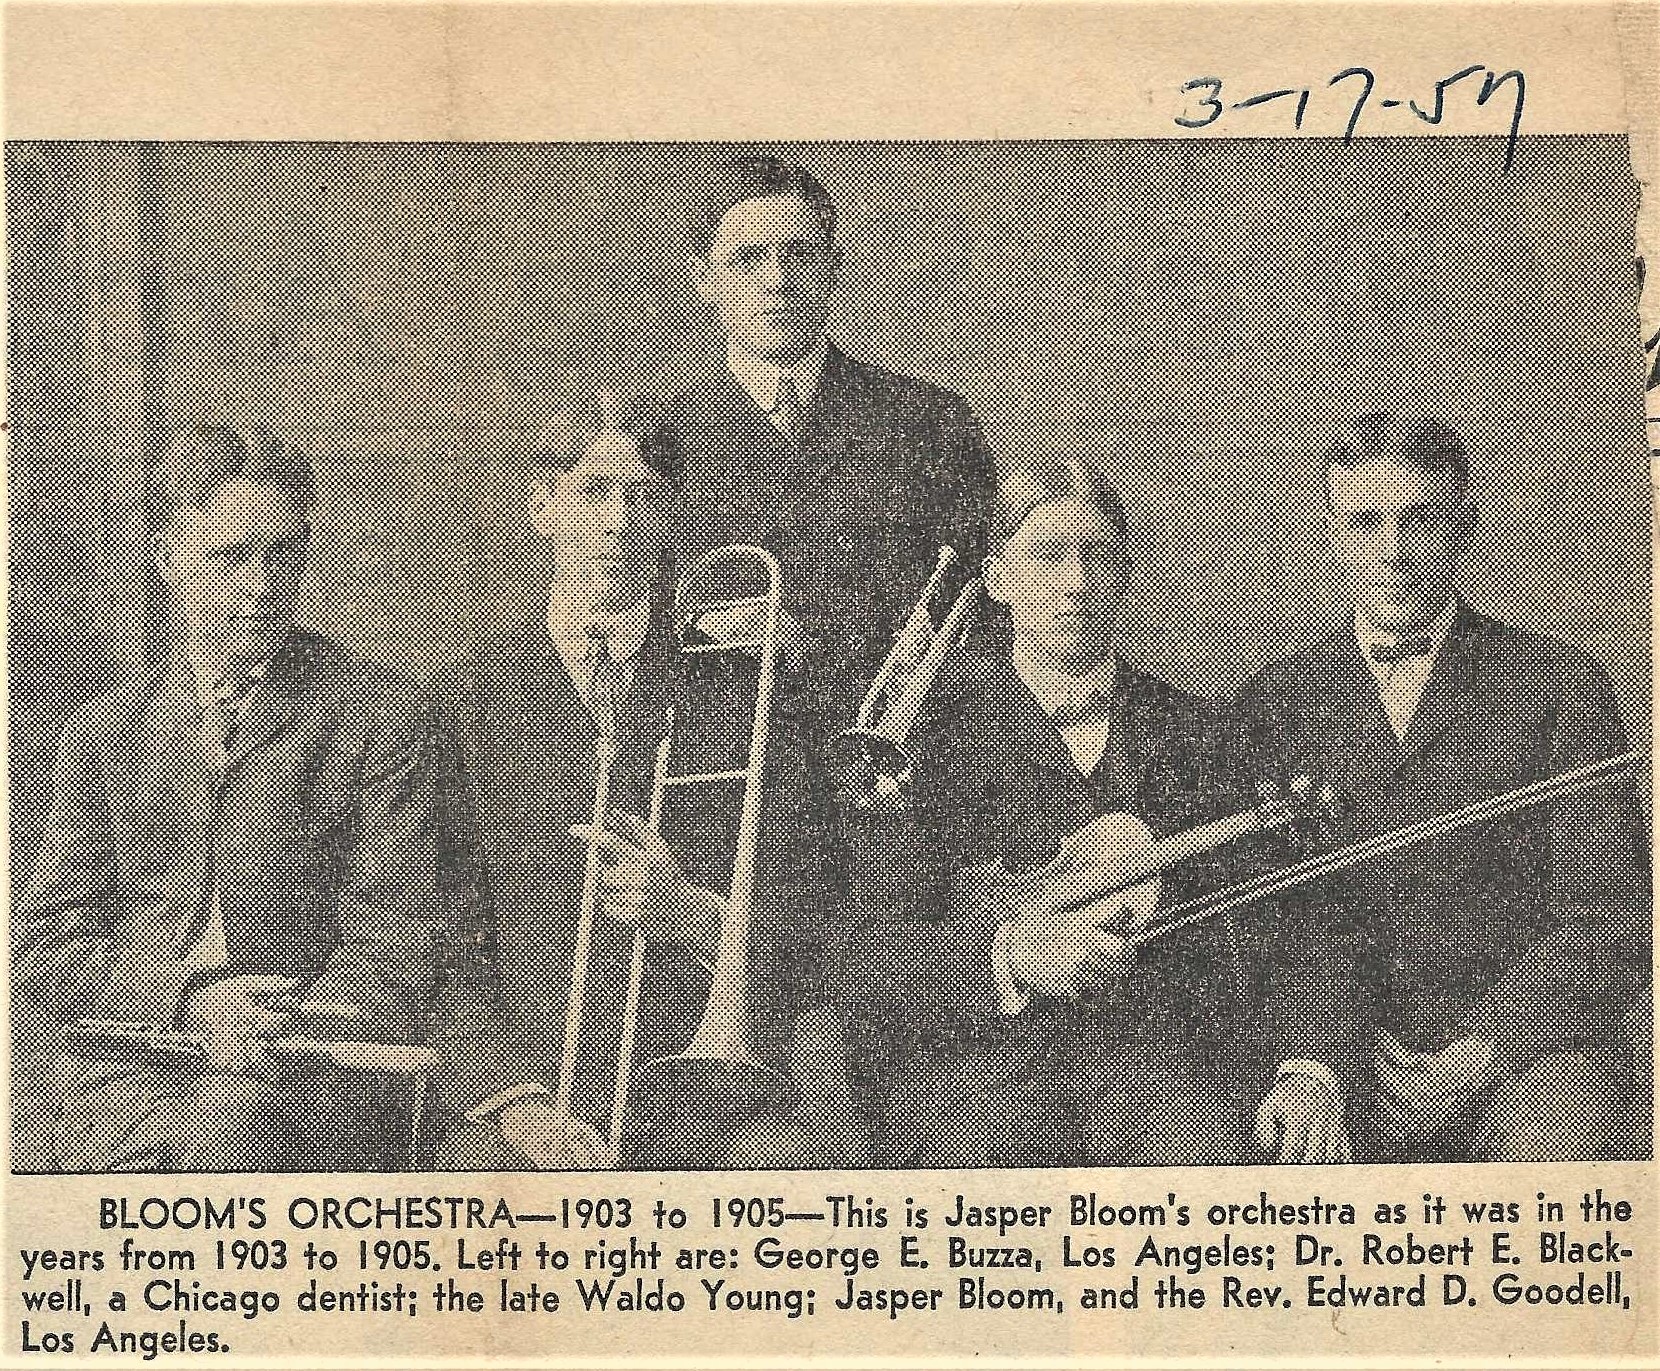 Photo of Bloom's Orchestra